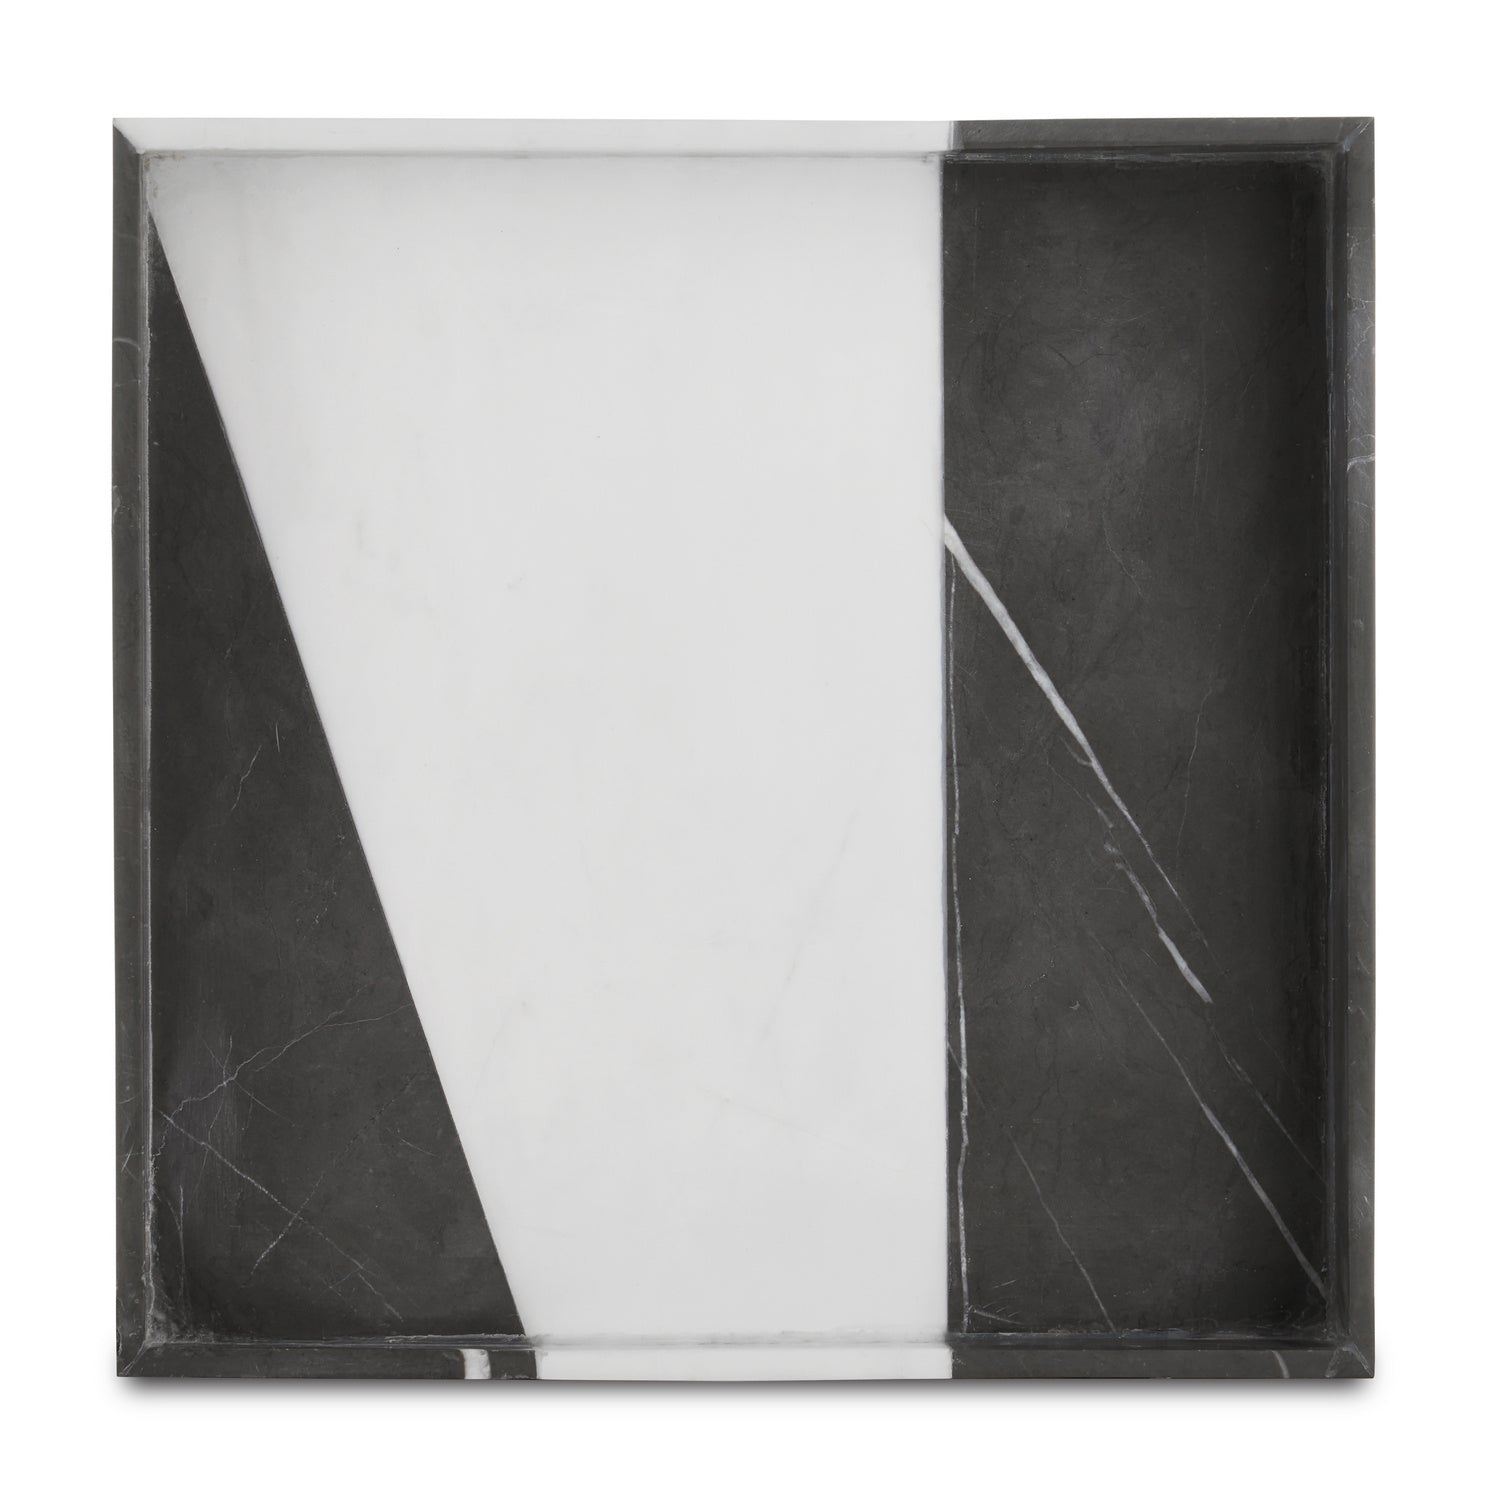 Tray from the Sena collection in Black/White finish